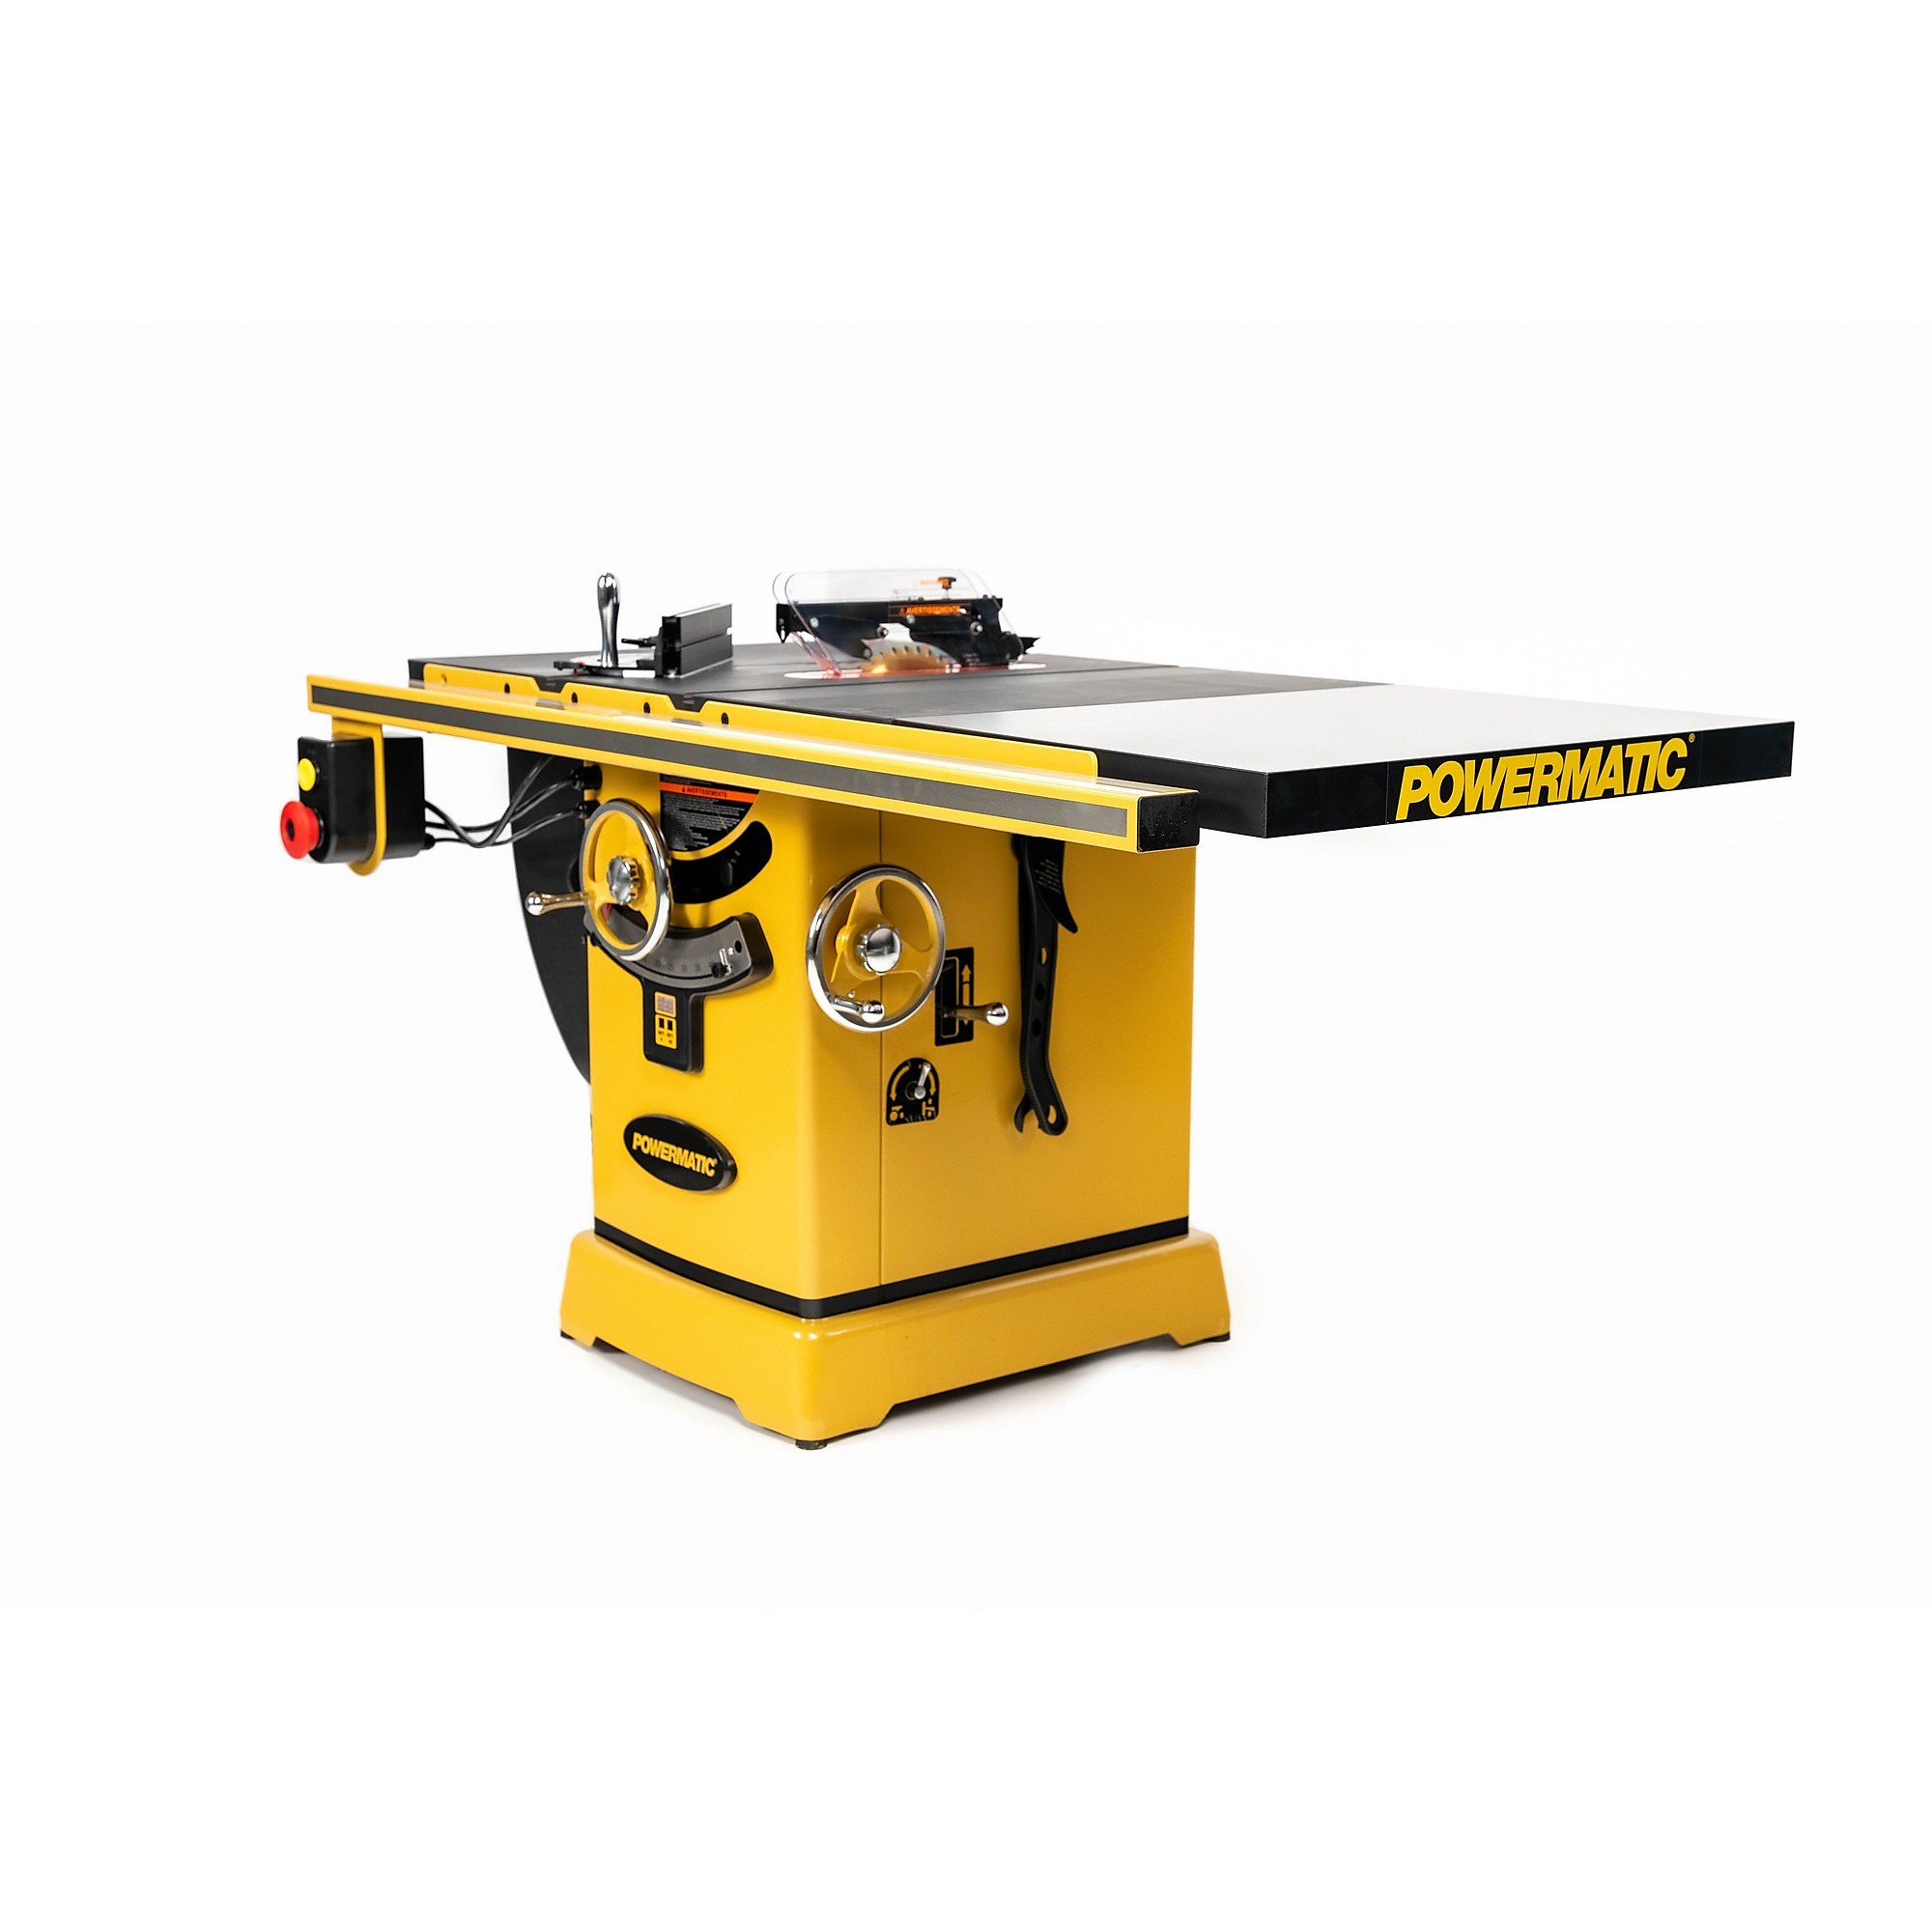 Powermatic, ArmorGlide Table Saw, Blade Diameter 10 Horsepower 5 HP, Volts 460 Model PM2000T